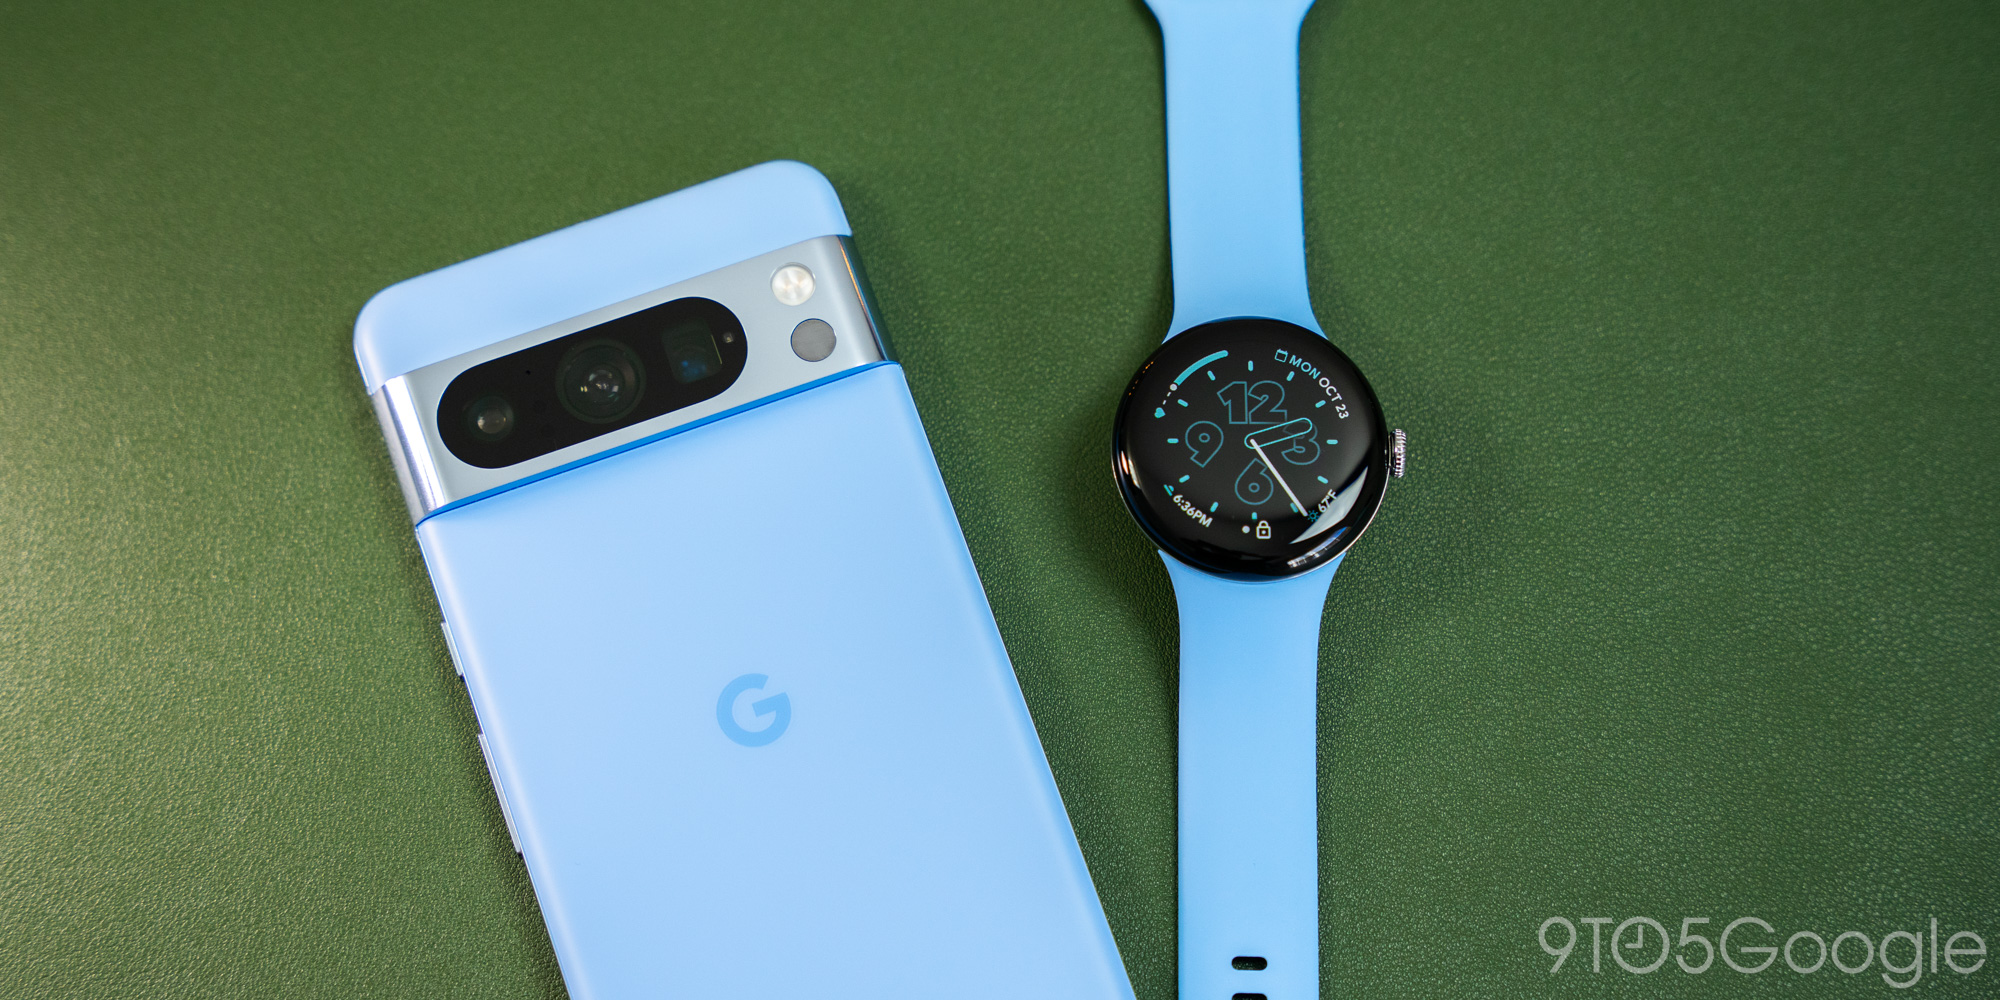 Google Pixel Watch hands-on: Possibly the prettiest smartwatch I've touched